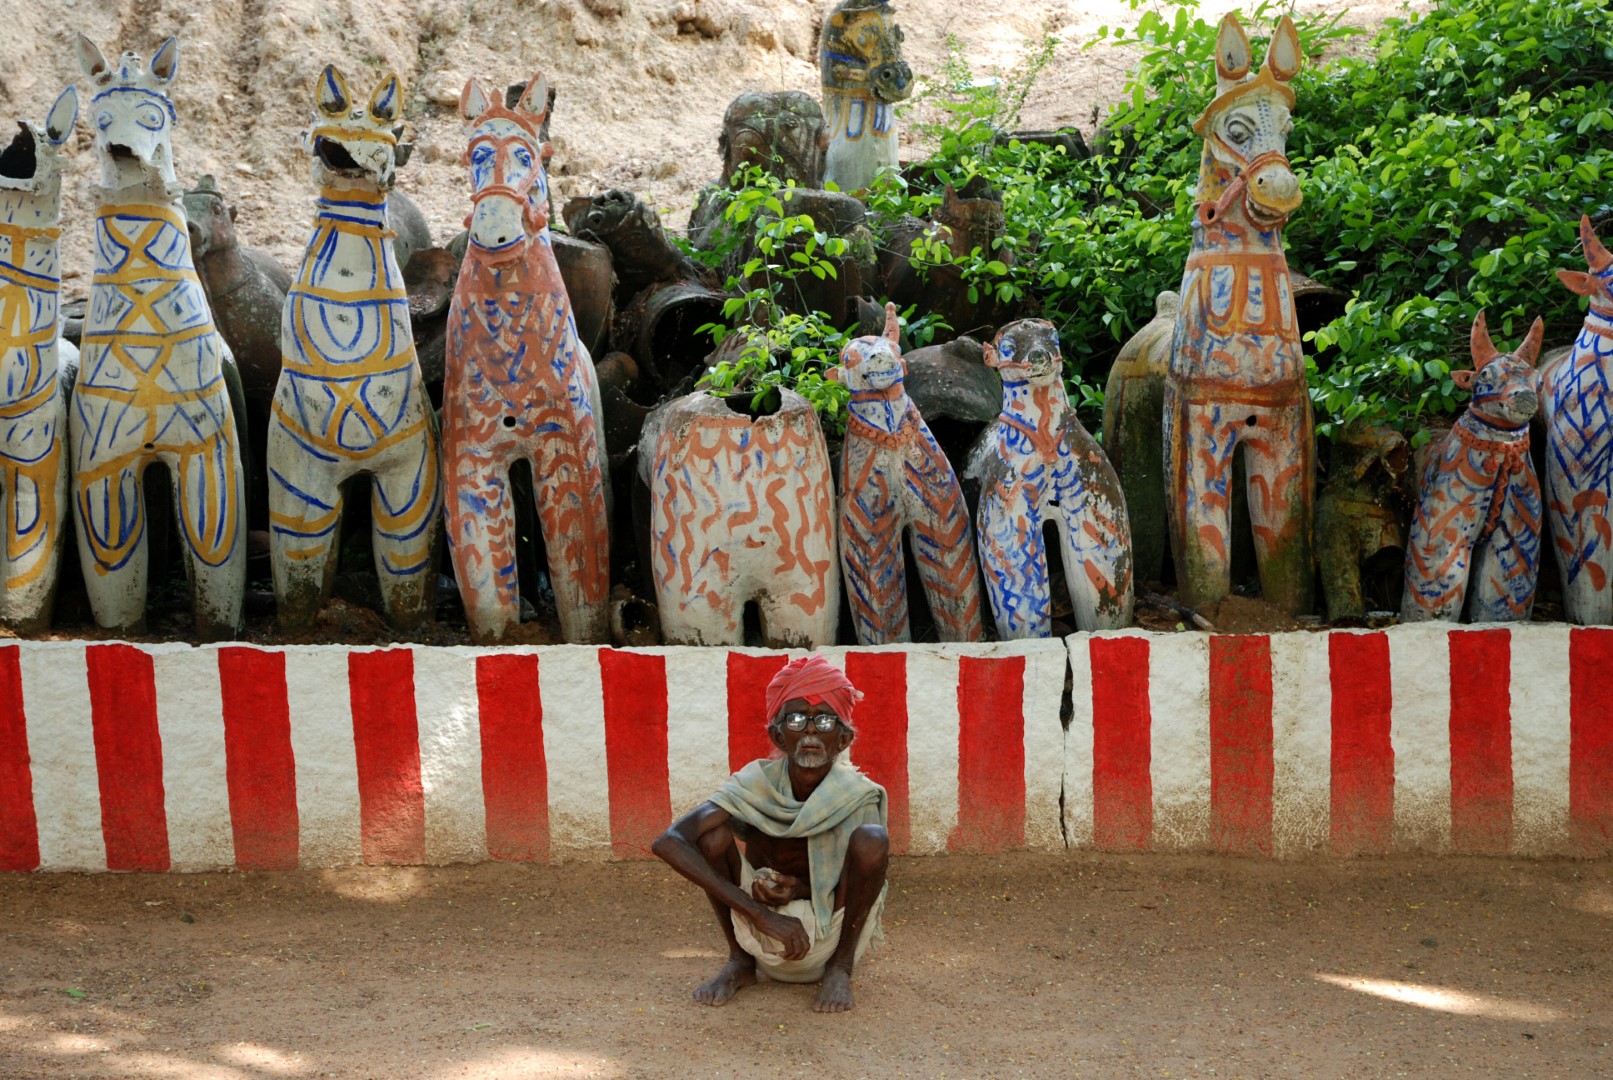 <span style="font-weight:normal;">A <i>kumbavishegam</i> (a ritual performed for the rejuvenation and regeneration of divine power) was performed at this shrine in Ilyangudipatti about four months before this photo was taken. For the ritual, the shrine’s walls were whitewashed and striped with red, and the central offerings – for the most part naked of their original water-based pigments and clothed in their original terracotta skin - were repainted with an unusual mixture of yellow, blue and orange!</span>